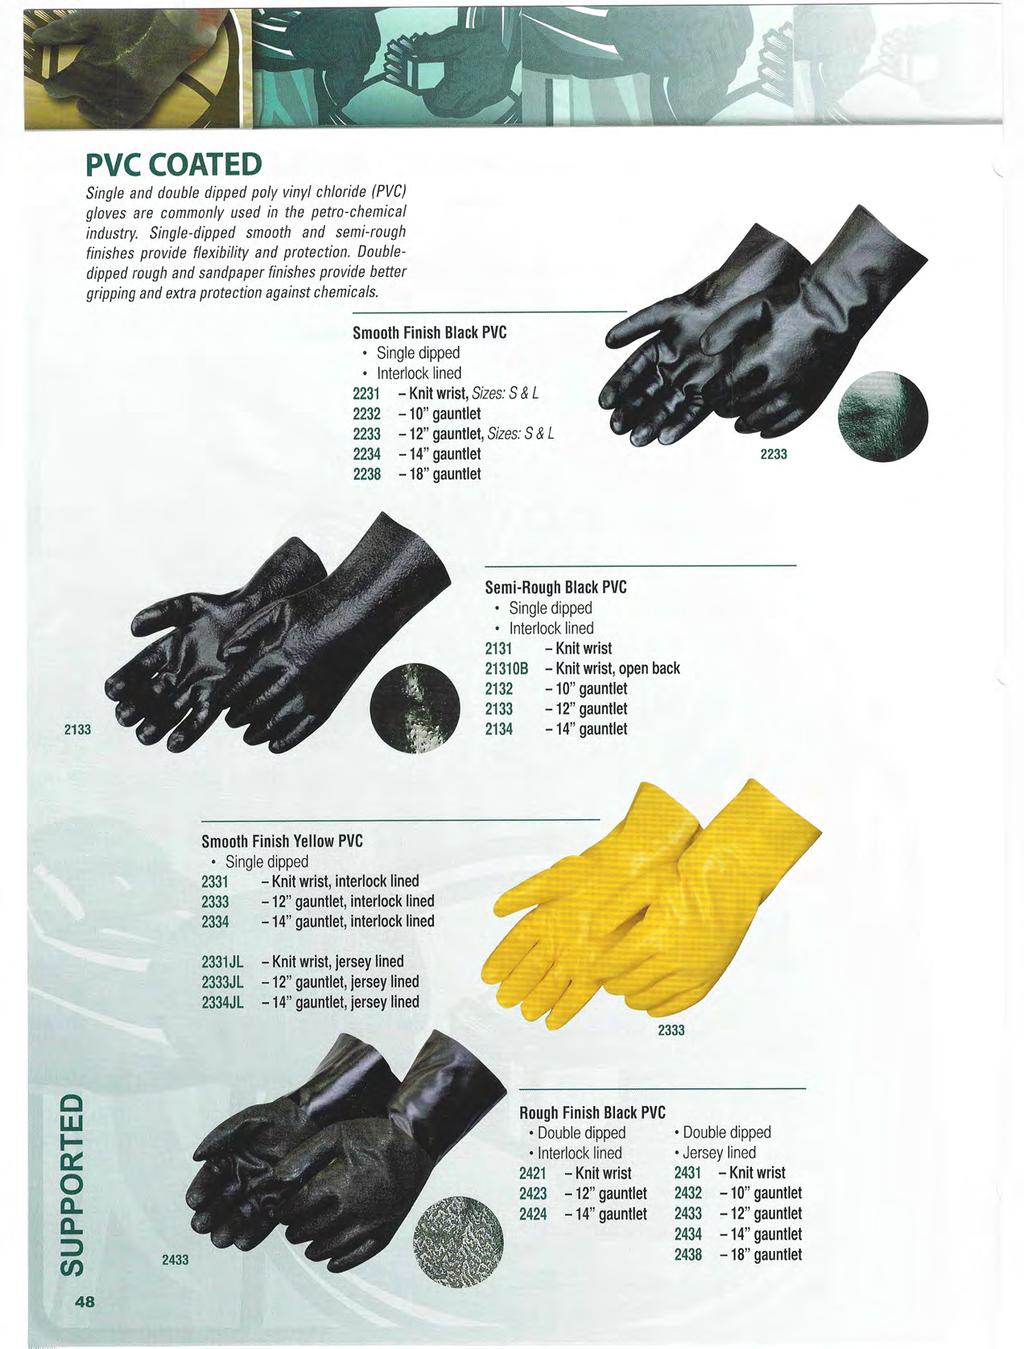 PVC COATED Single and double dipped poly vinyl chloride (PVC) gloves are commonly used in the petro-chemical industry. Single-dipped smooth and semi-rough finishes provide flexibility and protection.